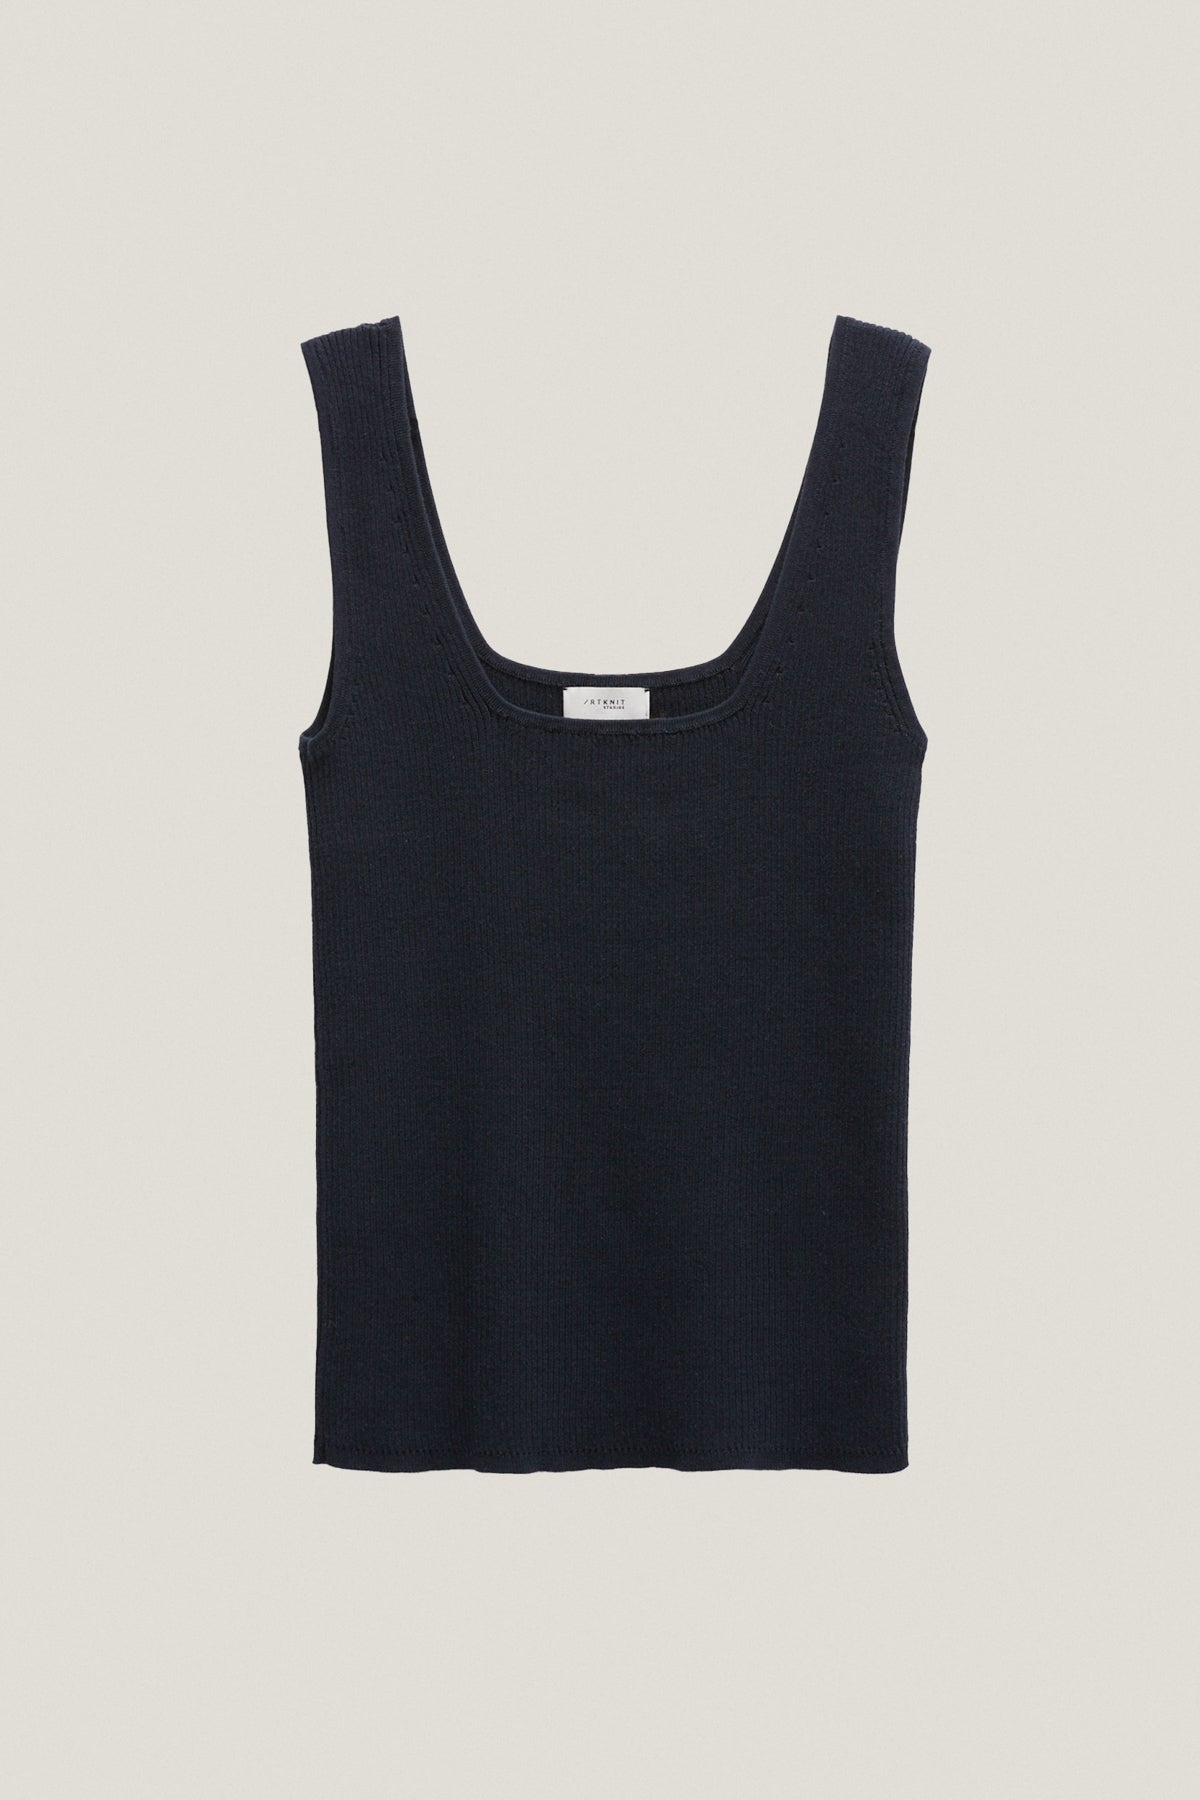 the organic cotton ribbed tank top imperfect version 22 blue navy